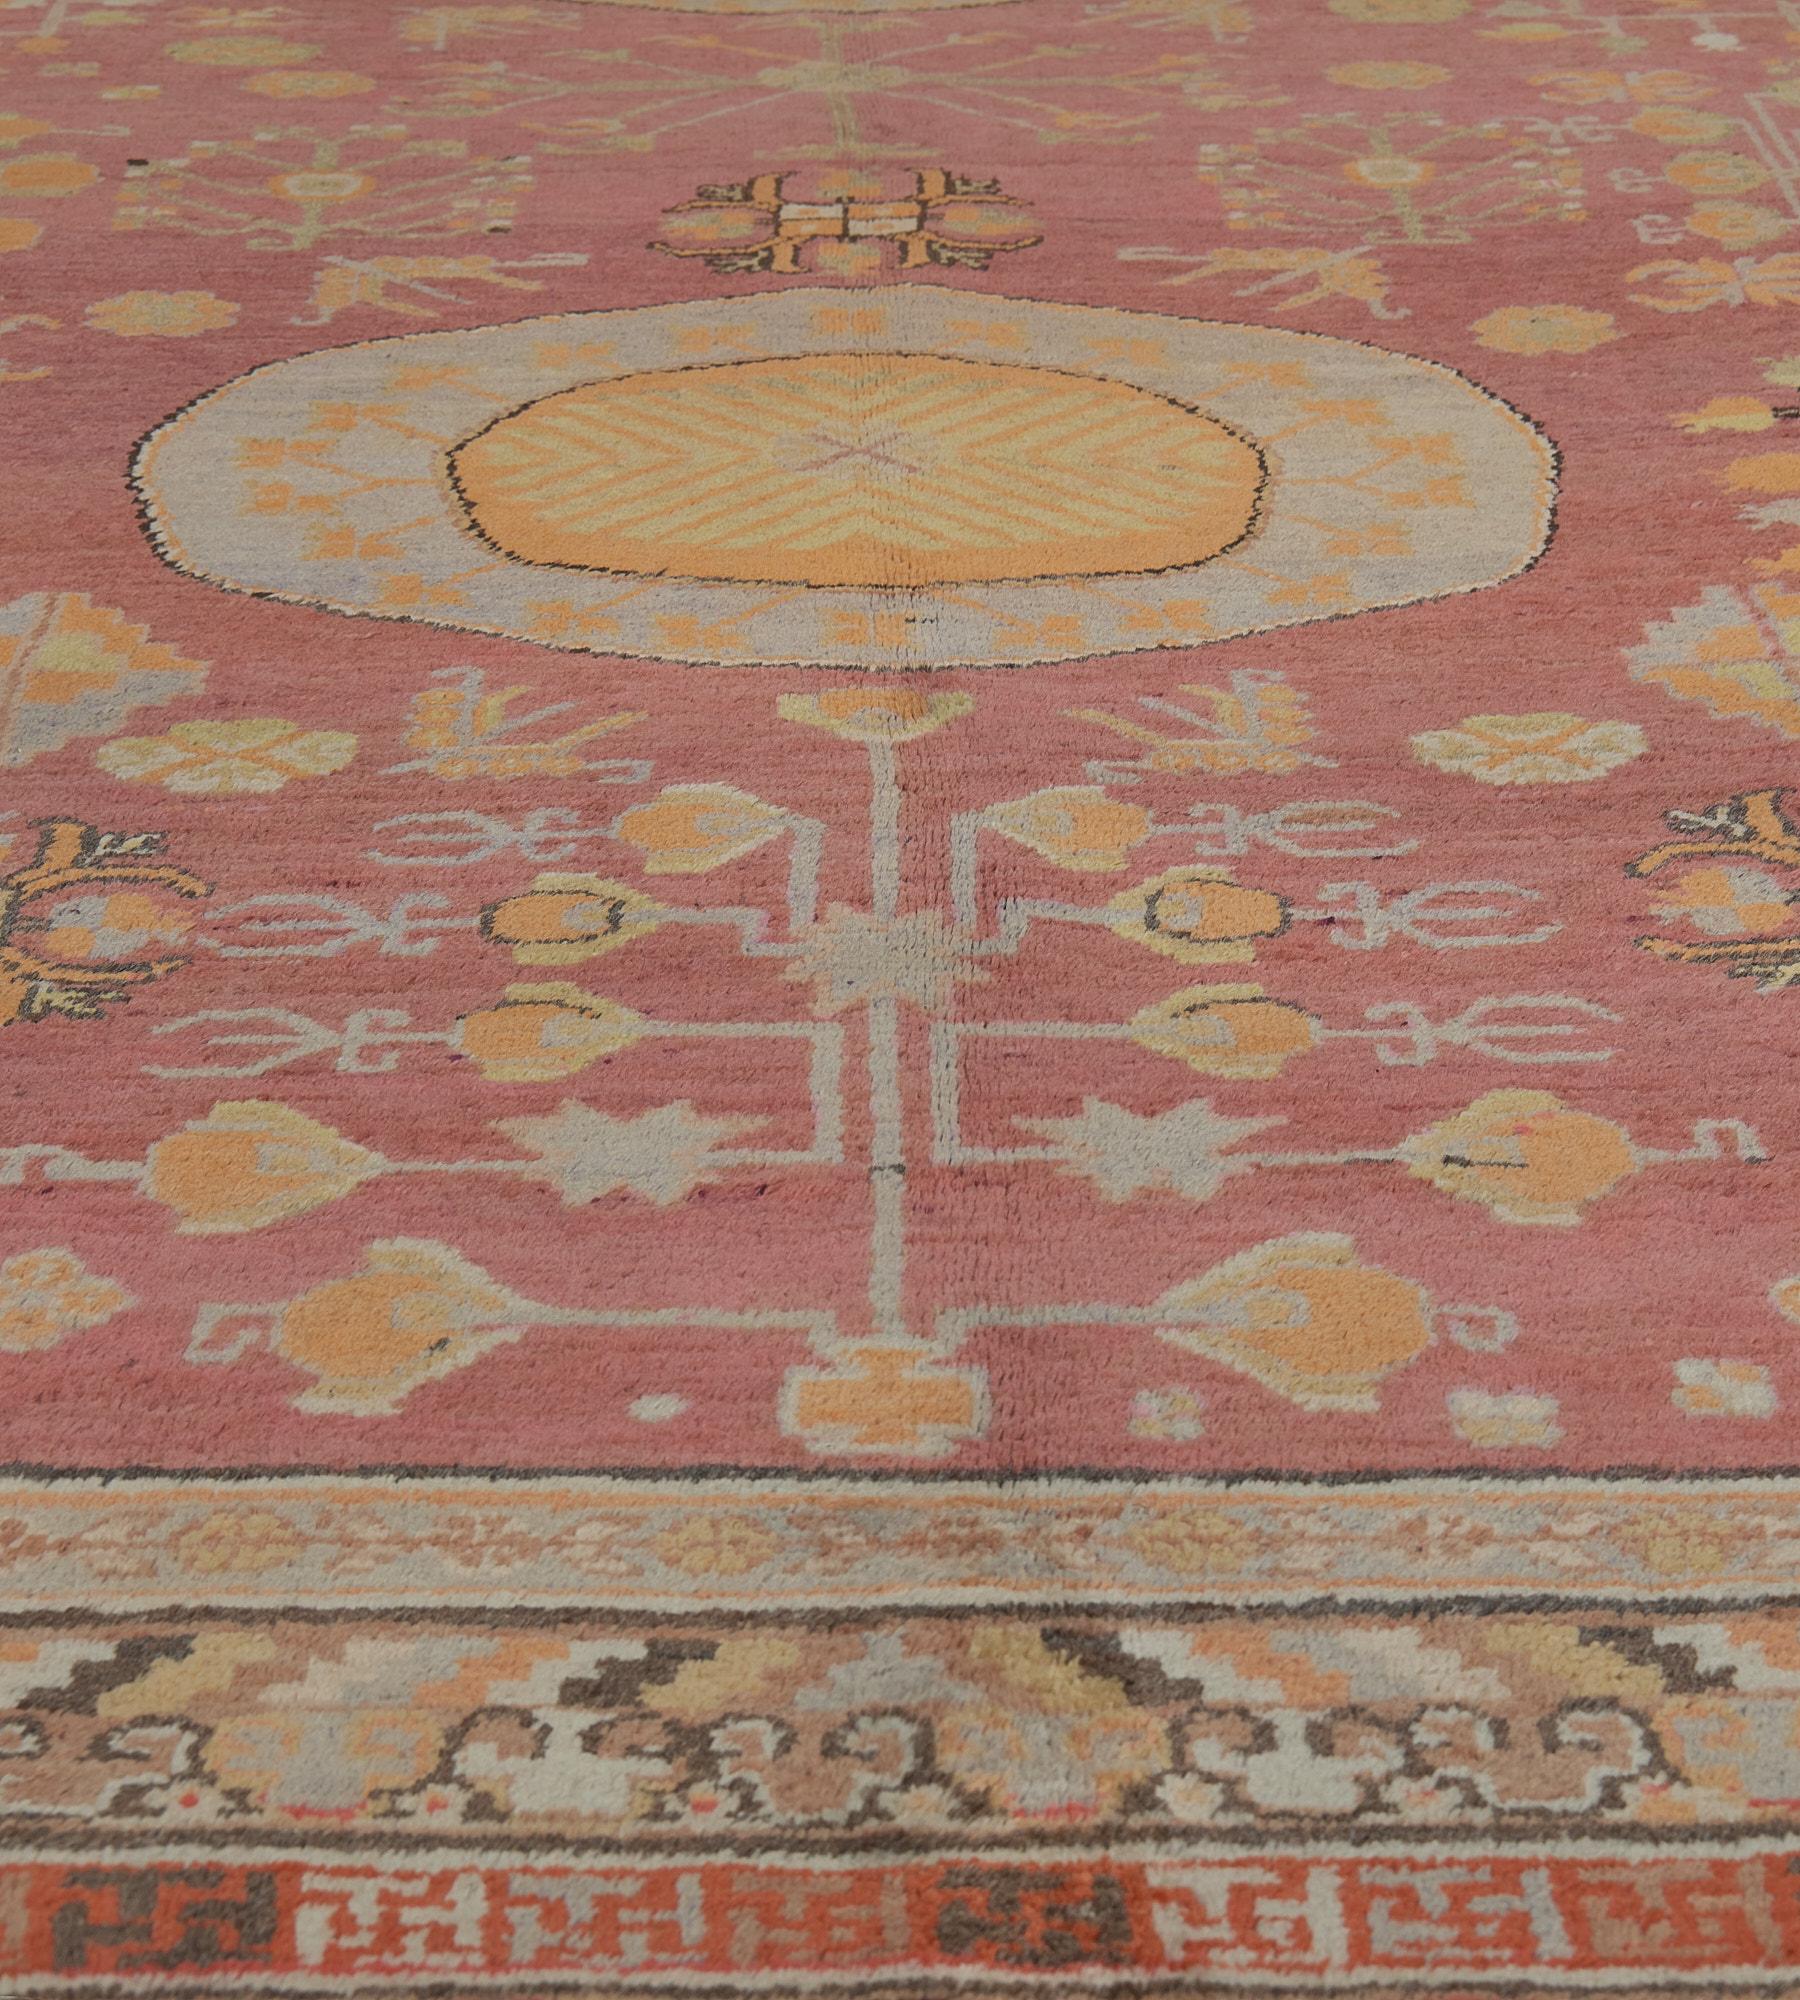 This antique Khotan rug has a shaded raspberry-red field with scattered angular floral stems and flowerheads around a pair of roundels with a central apricot lozenge and a golden-yellow angular serrated vine surrounded by a broad light-blue band